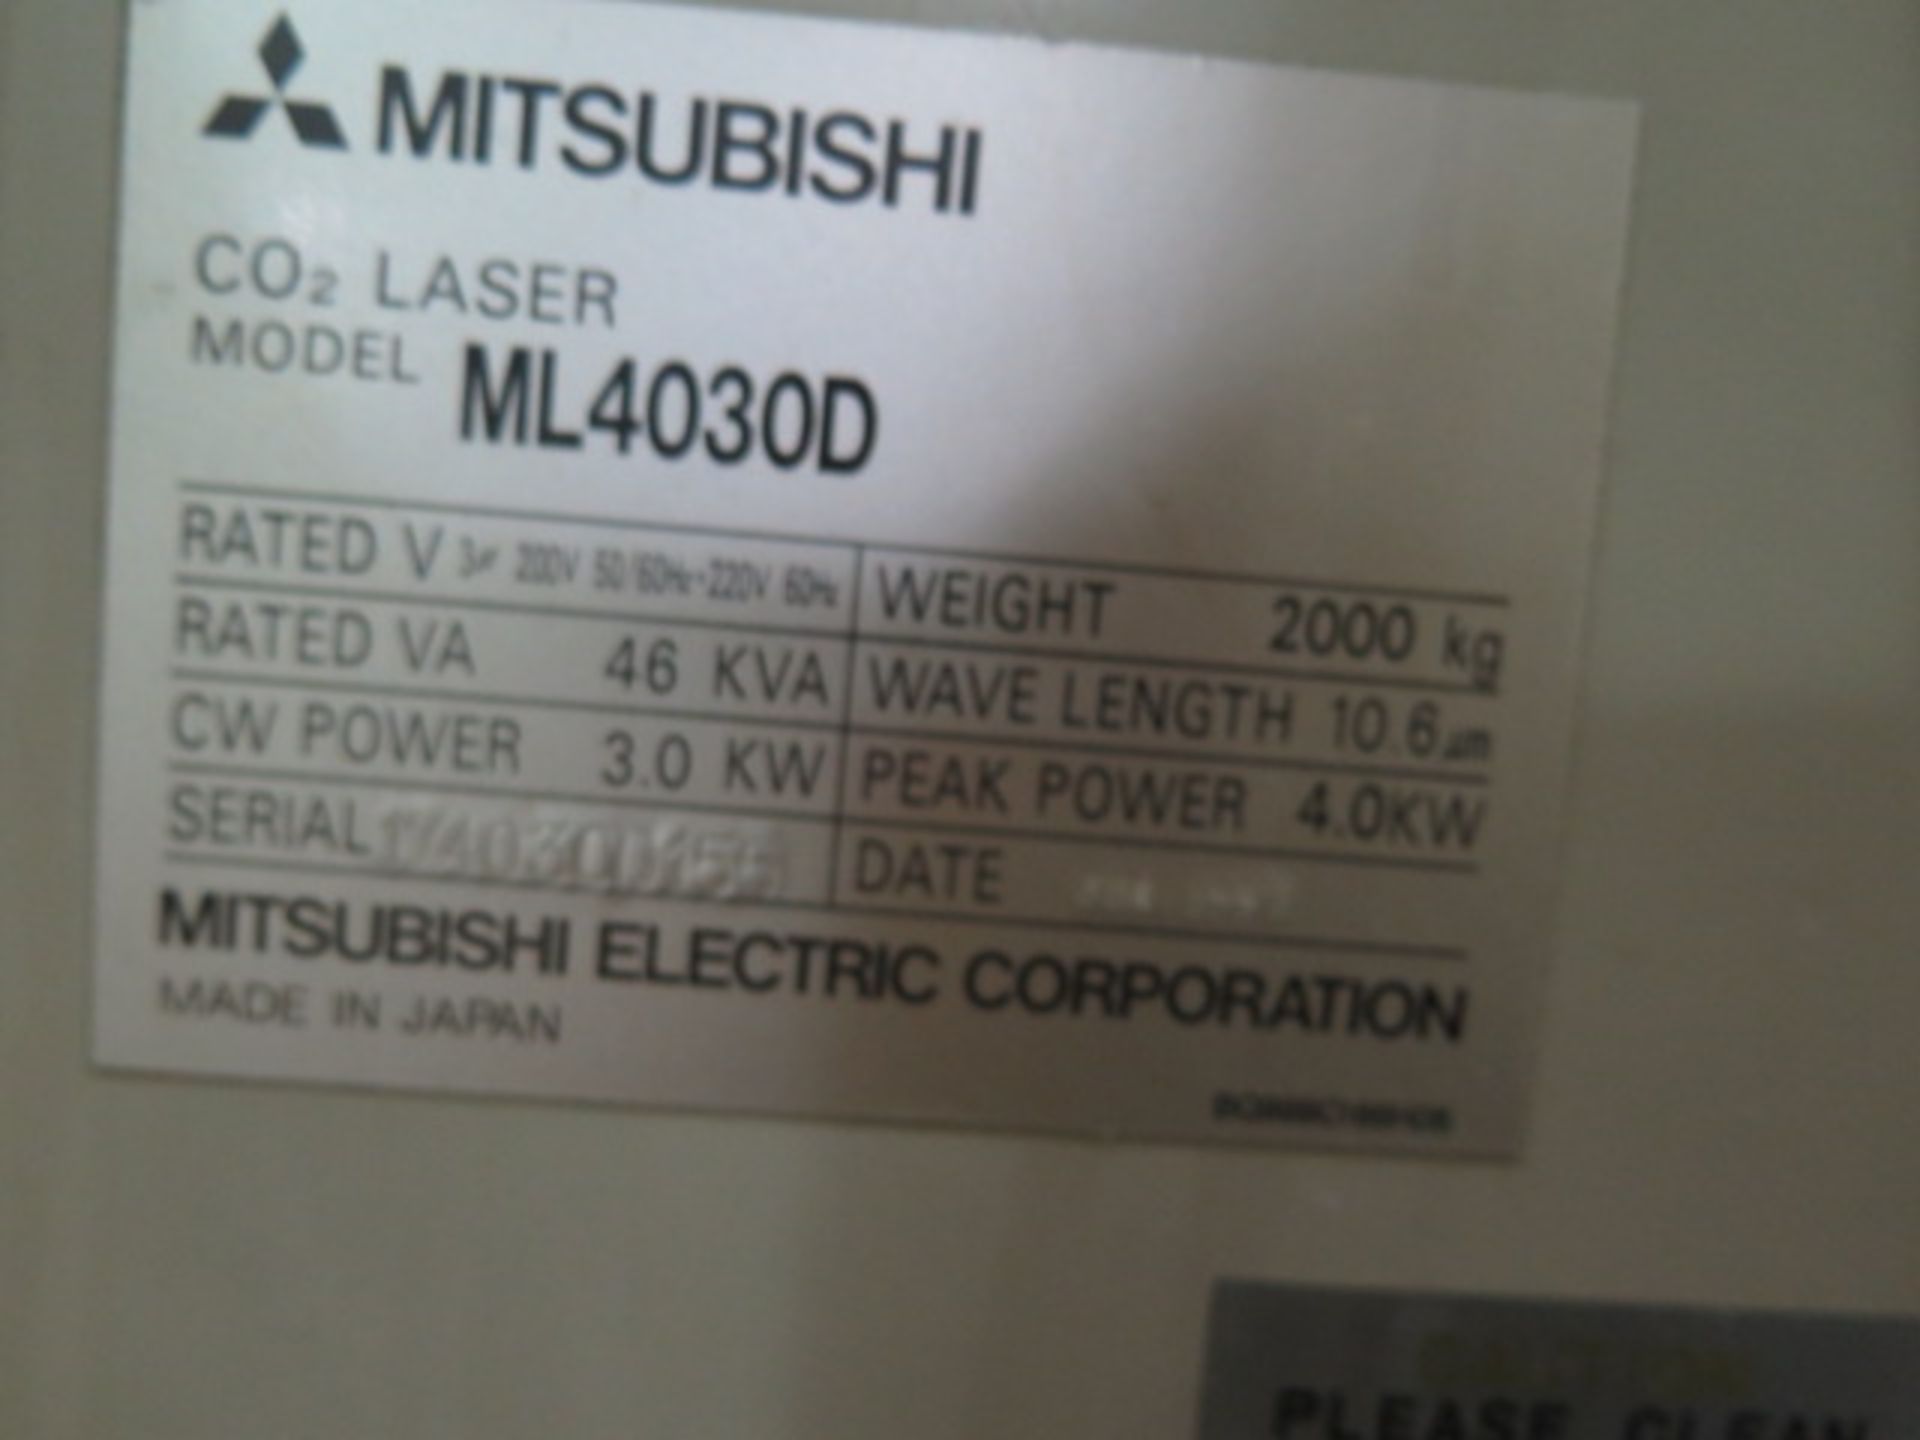 1997 Mitsubishi 3015 LXP 5’ x 10’ 2-Shuttle CNC Laser Contour Machine s/n LH44284 w/ SOLD AS IS - Image 23 of 36